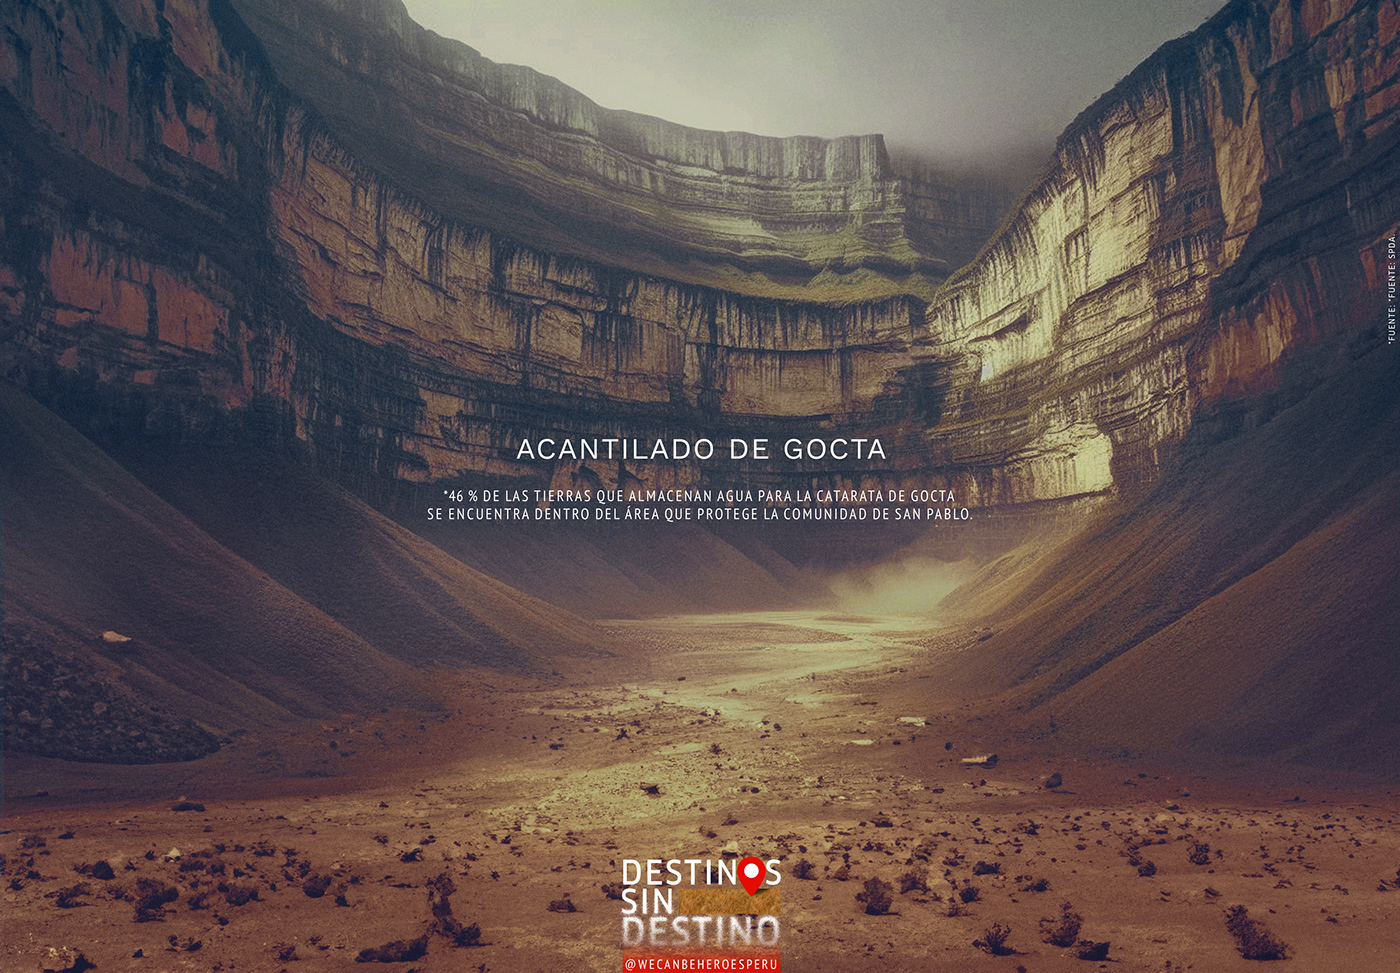 Advertising  public interest campaign ads adsoftheworld peru environment medio ambiente ecologia wecanbeheroes